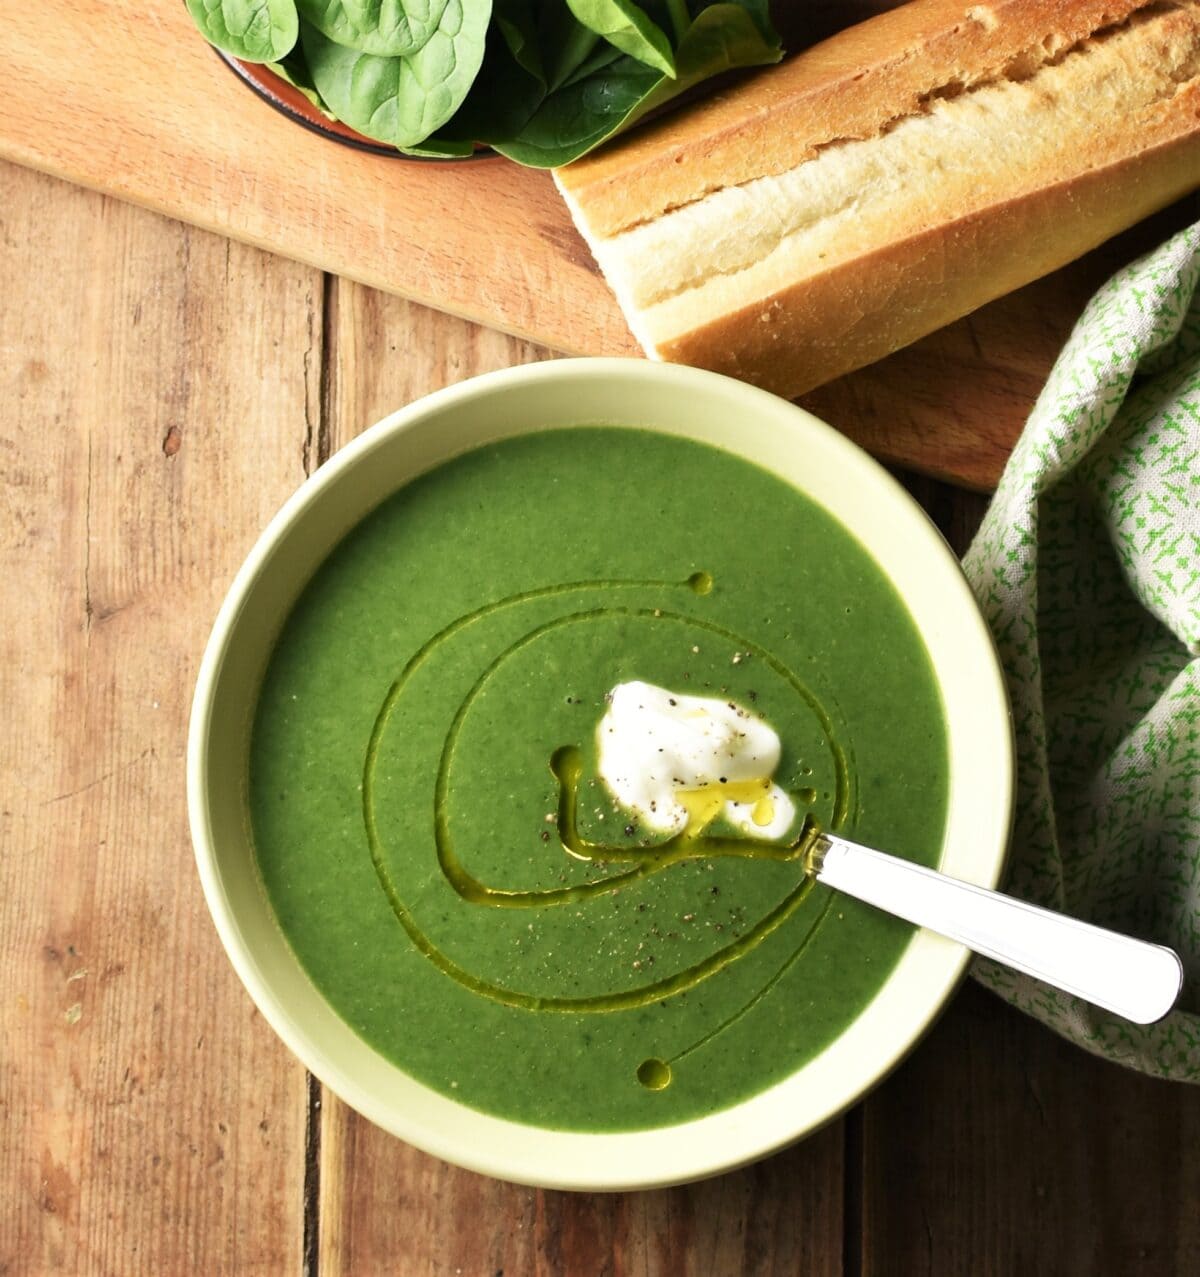 Creamy spinach soup with dollop of yogurt in green bowl with spoon, green cloth, baguette and spinach in background.